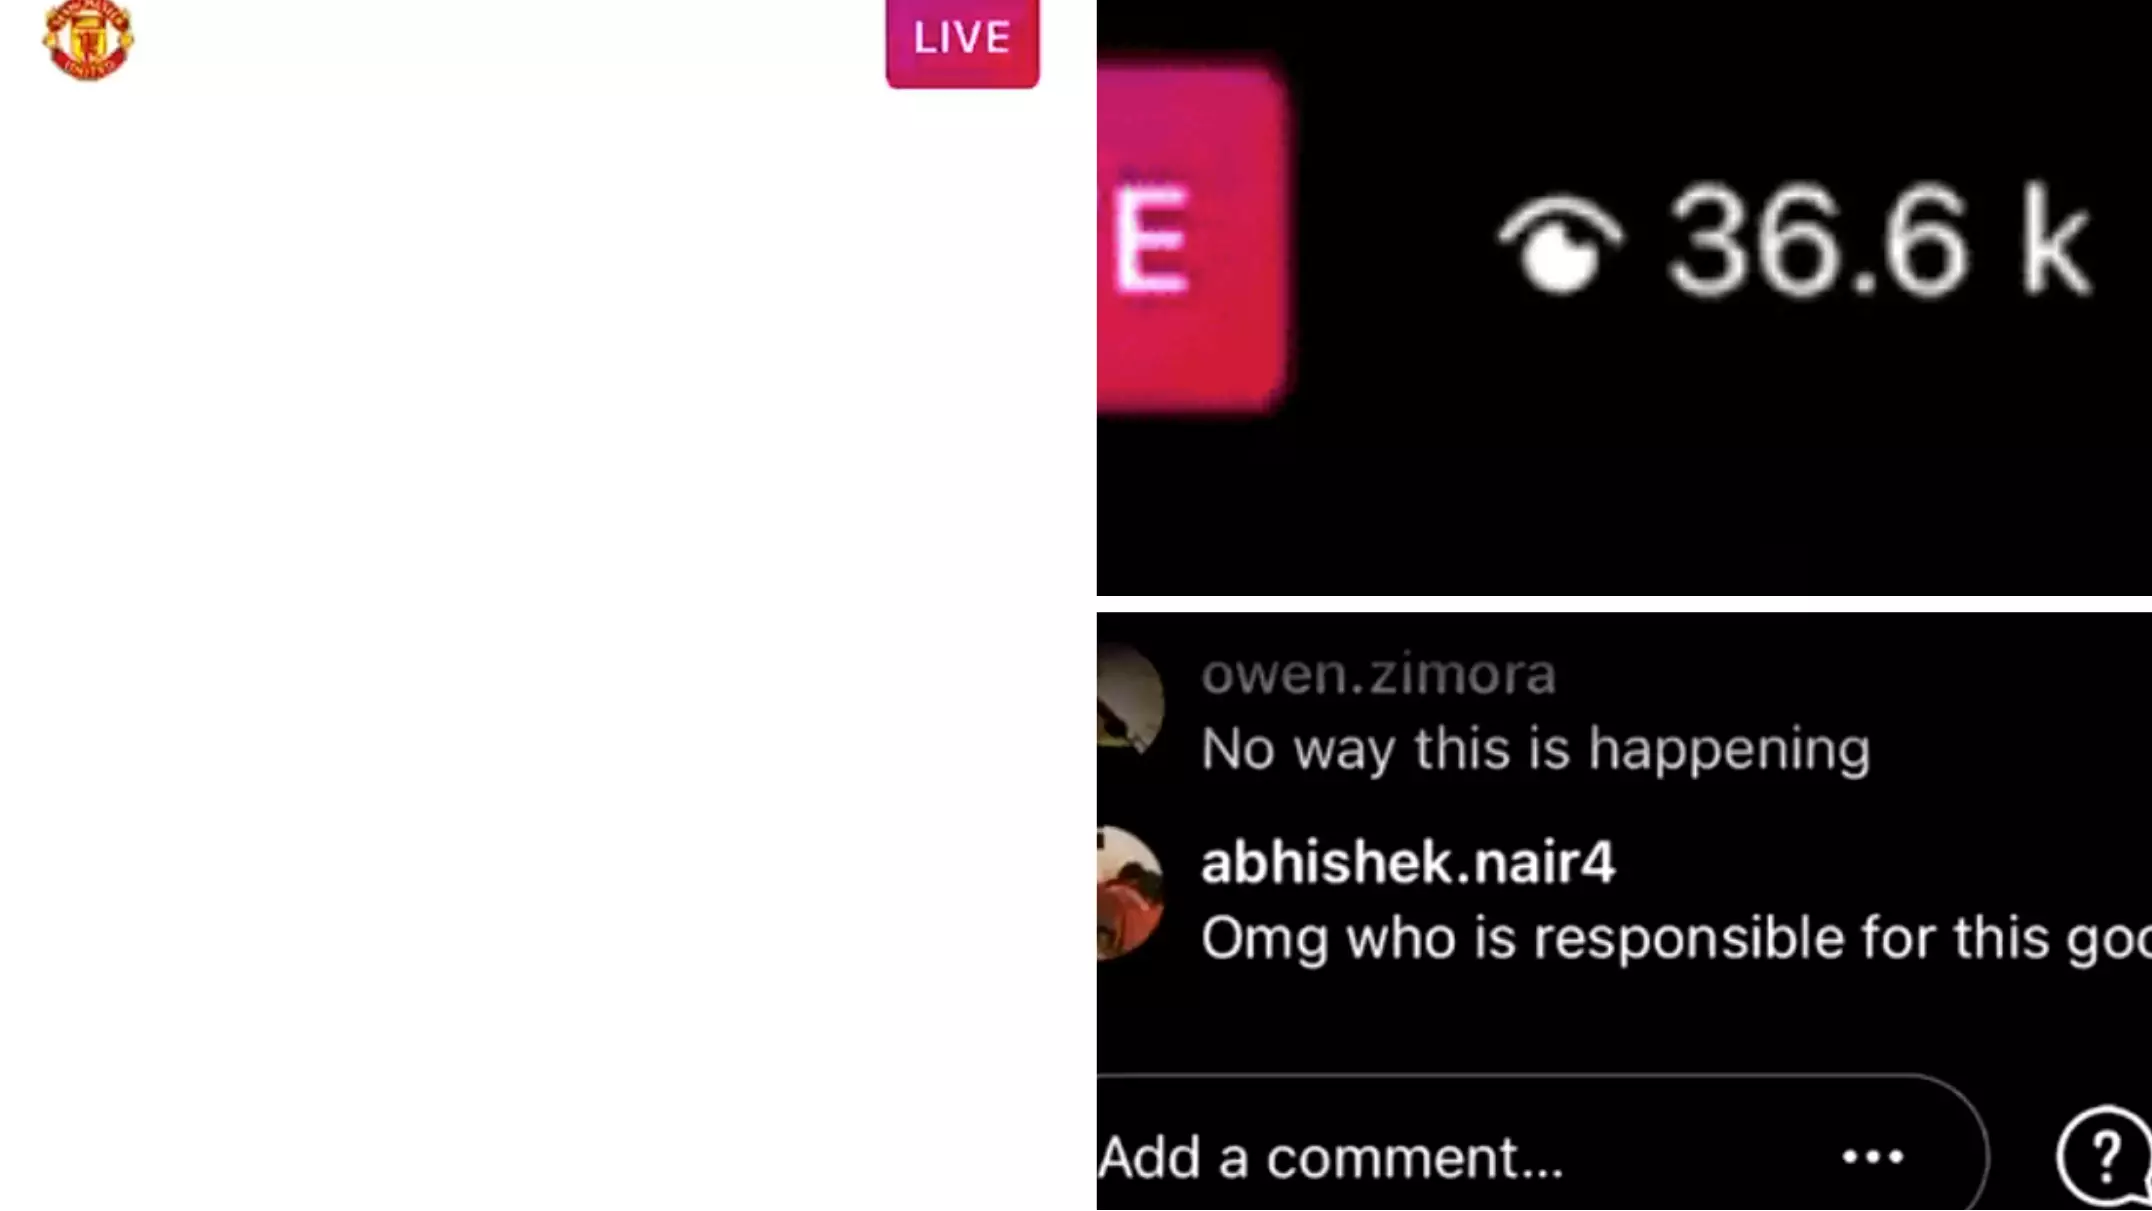 Manchester United Accidentally Go Live On Instagram And 37,000 Confused Fans Tune In 